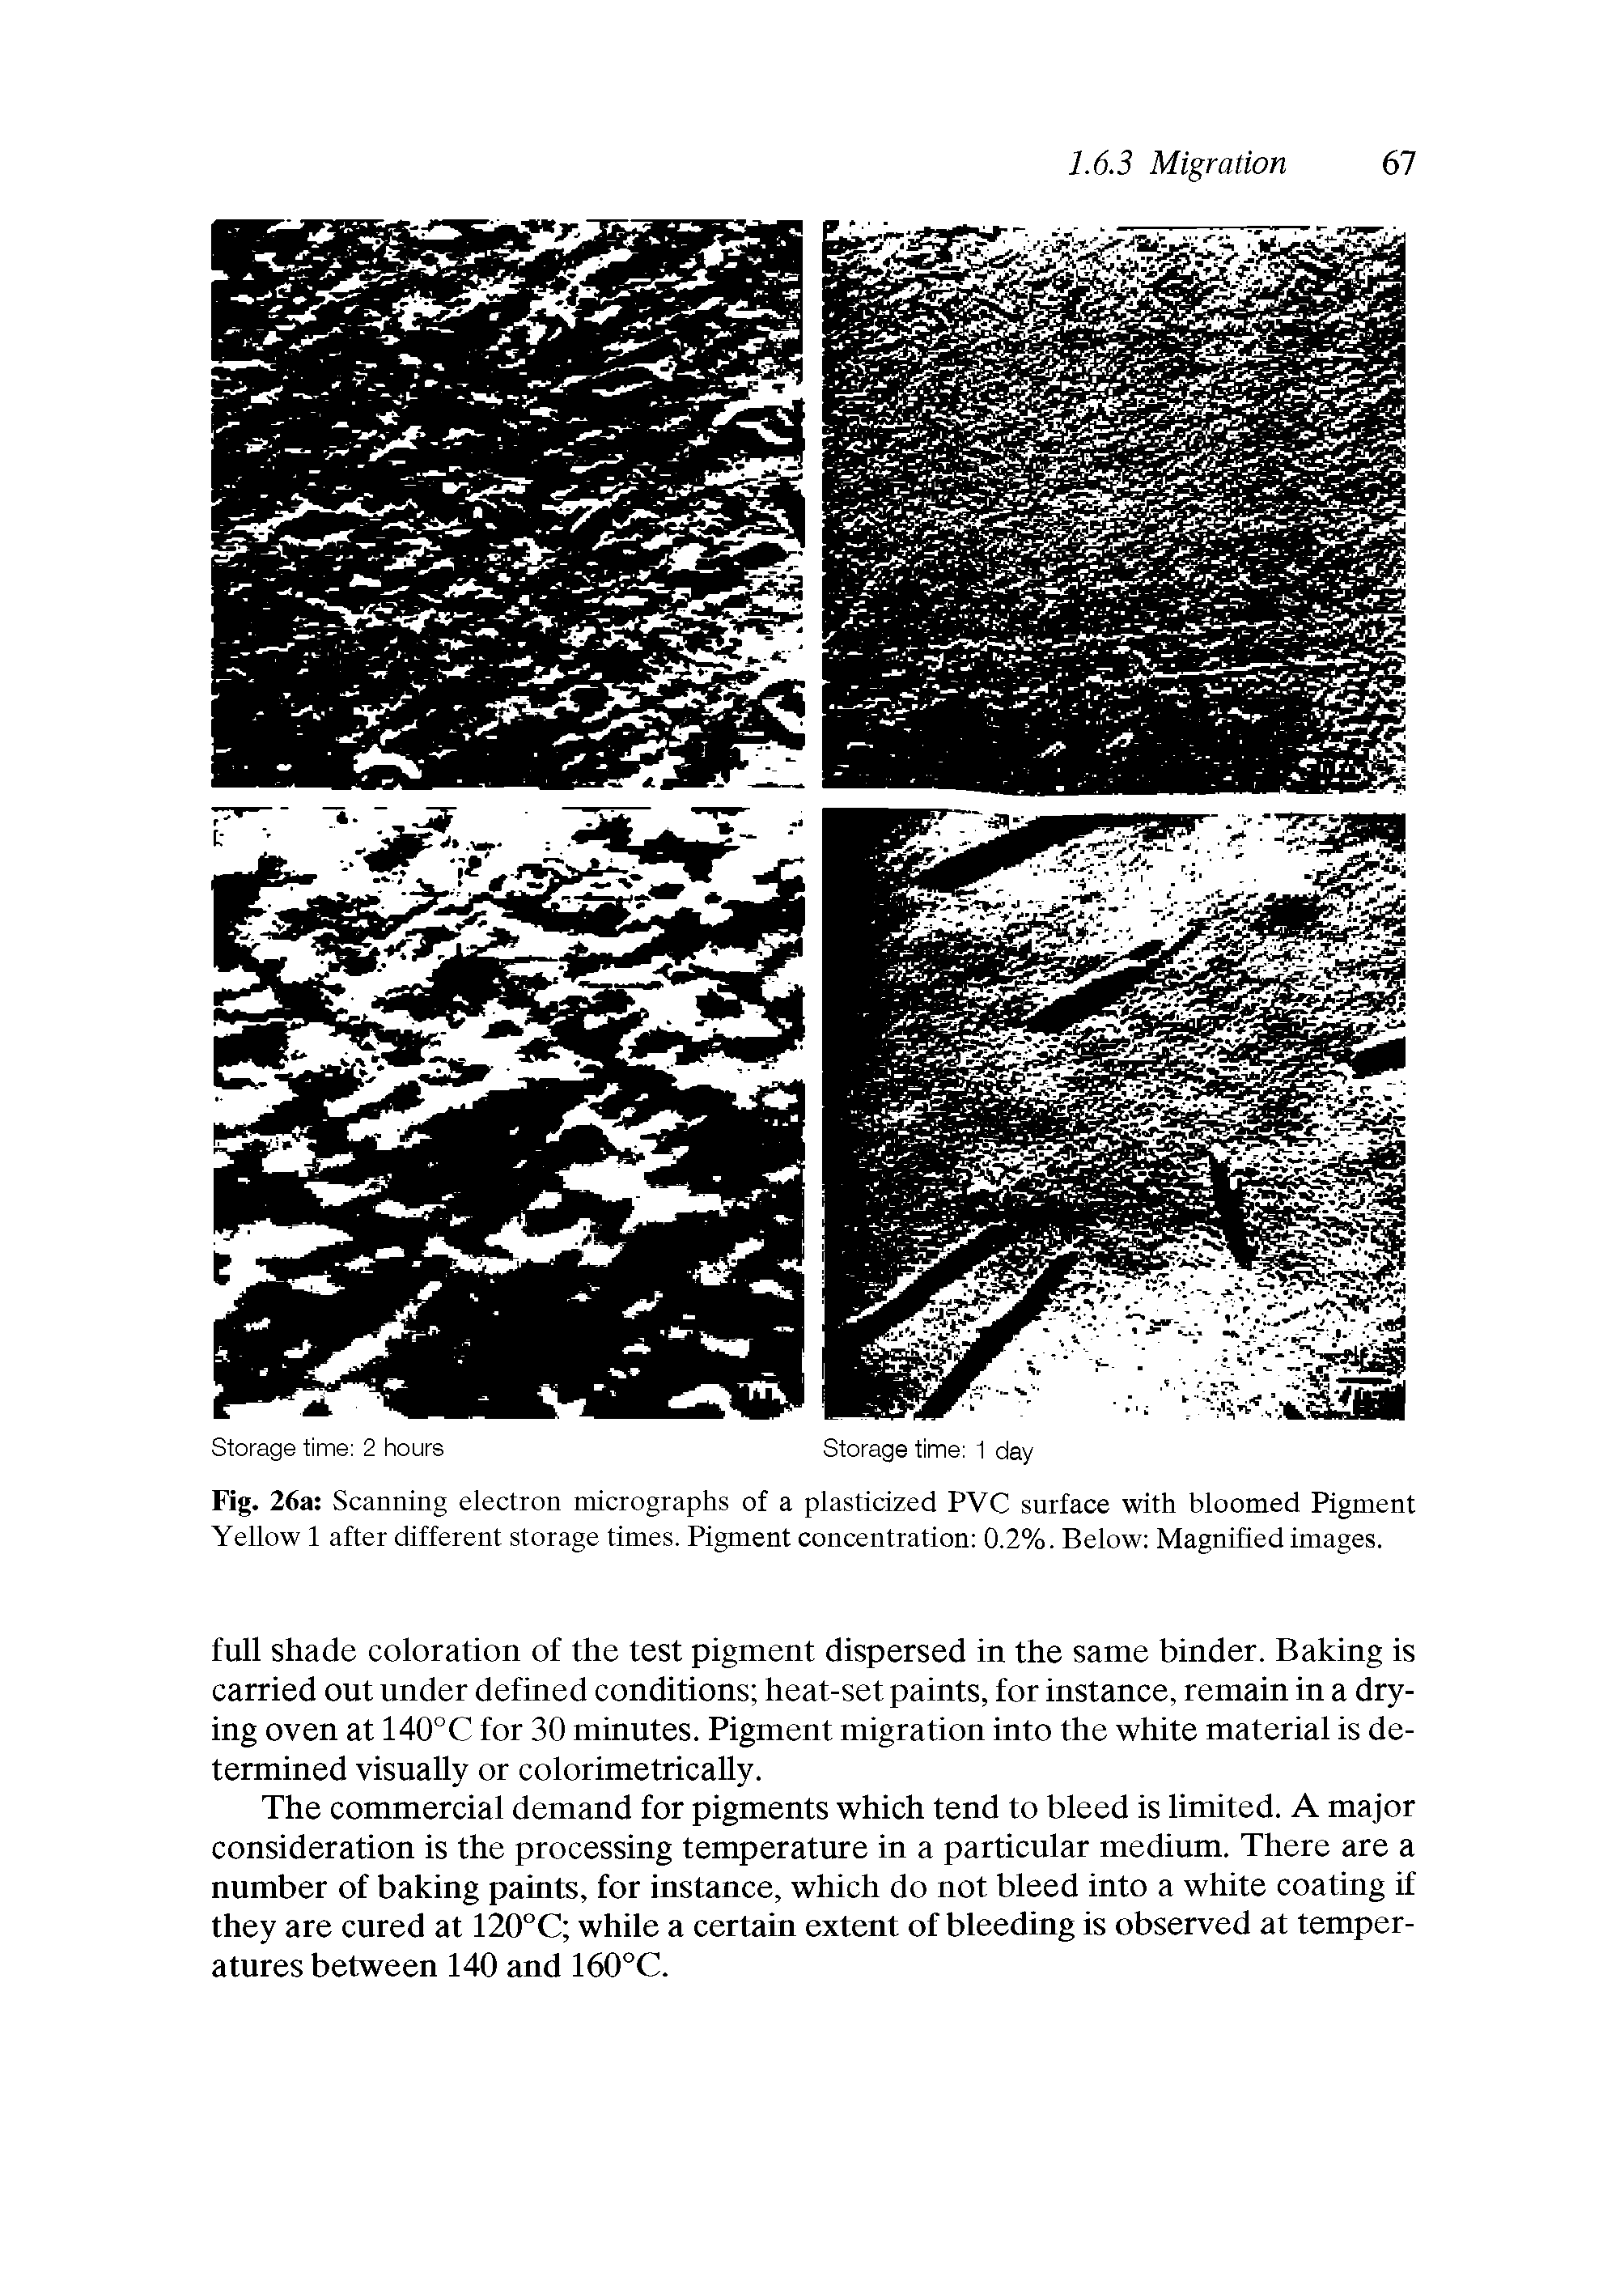 Fig. 26a Scanning electron micrographs of a plasticized PVC surface with bloomed Pigment Yellow 1 after different storage times. Pigment concentration 0.2%. Below Magnified images.